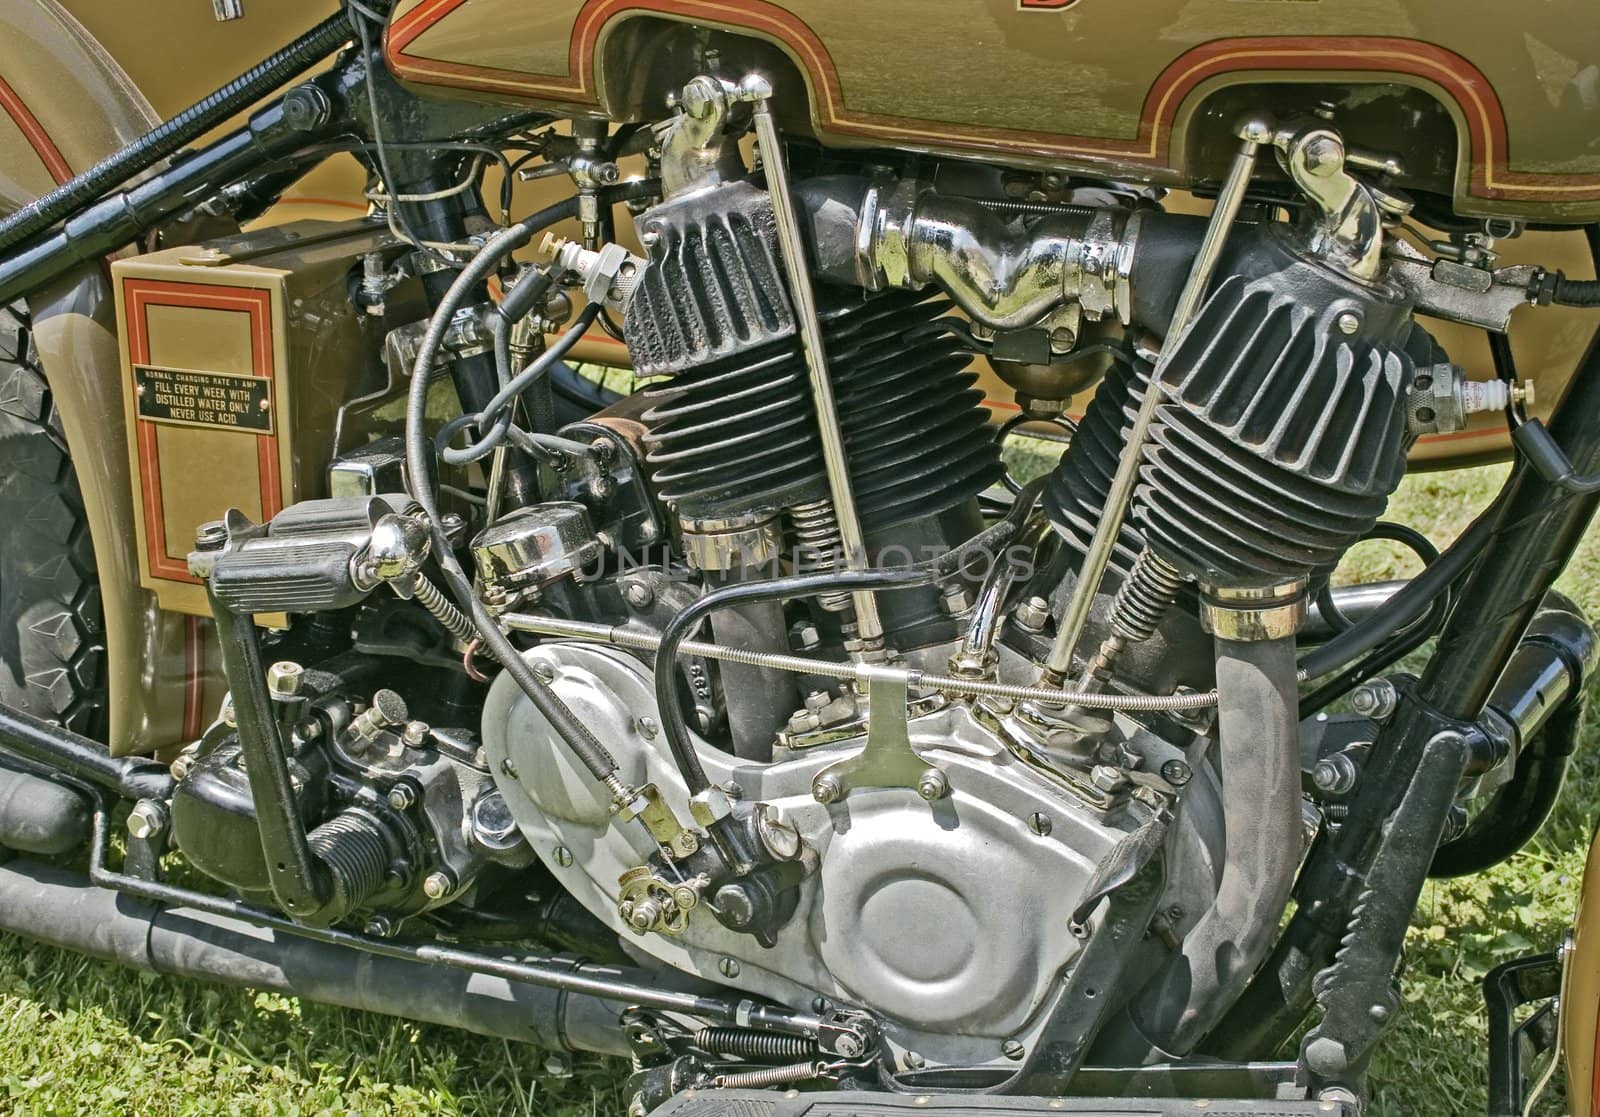 close-up of a vintage motorcycle